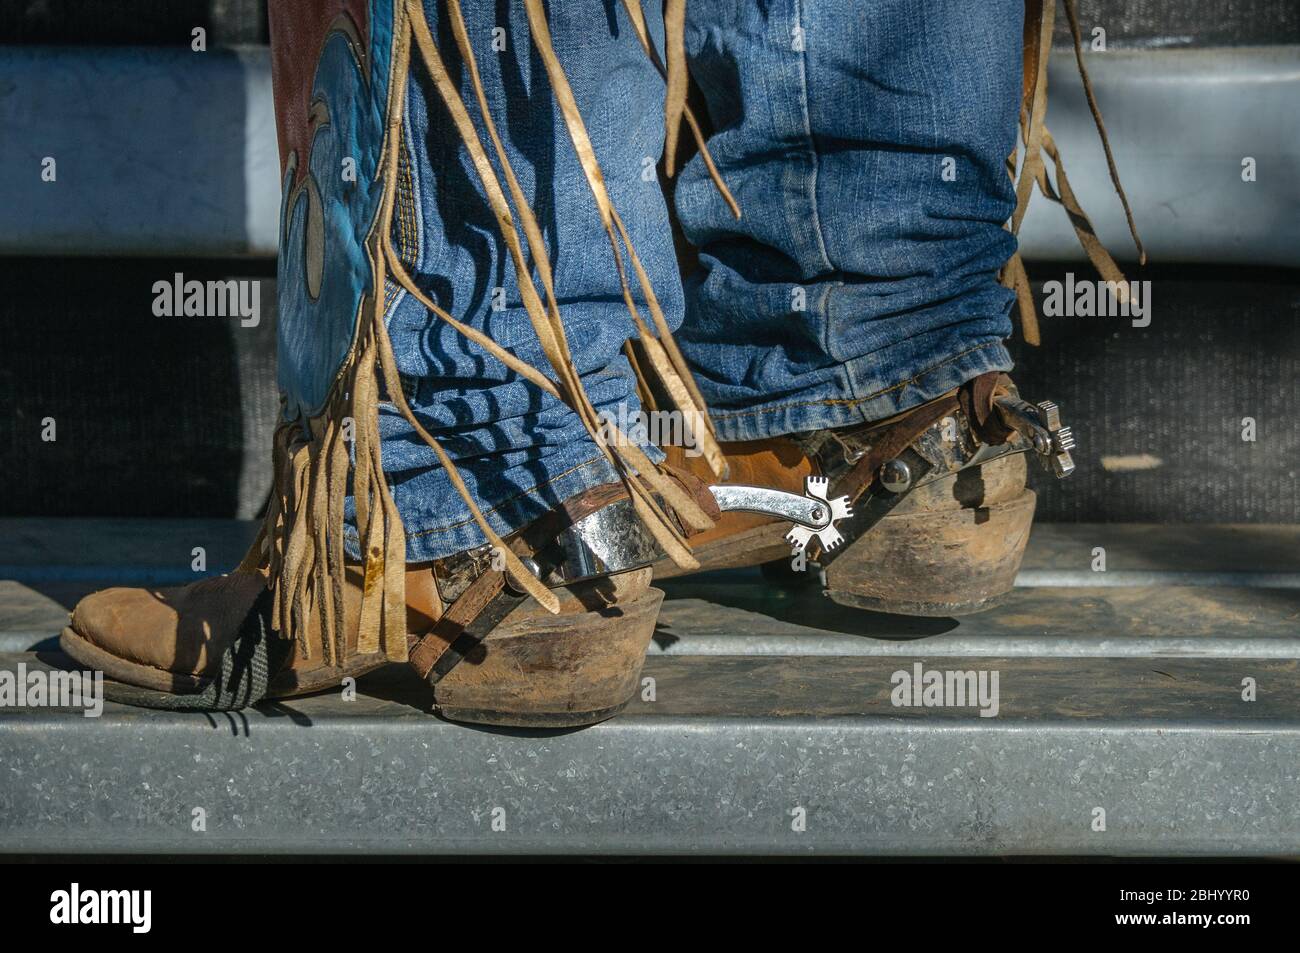 Lower legs of rodeo rider with jeans, chaps, boots and spurs atop the platform on one of the chutes, ready to take his ride at Mareeba in Australia. Stock Photo